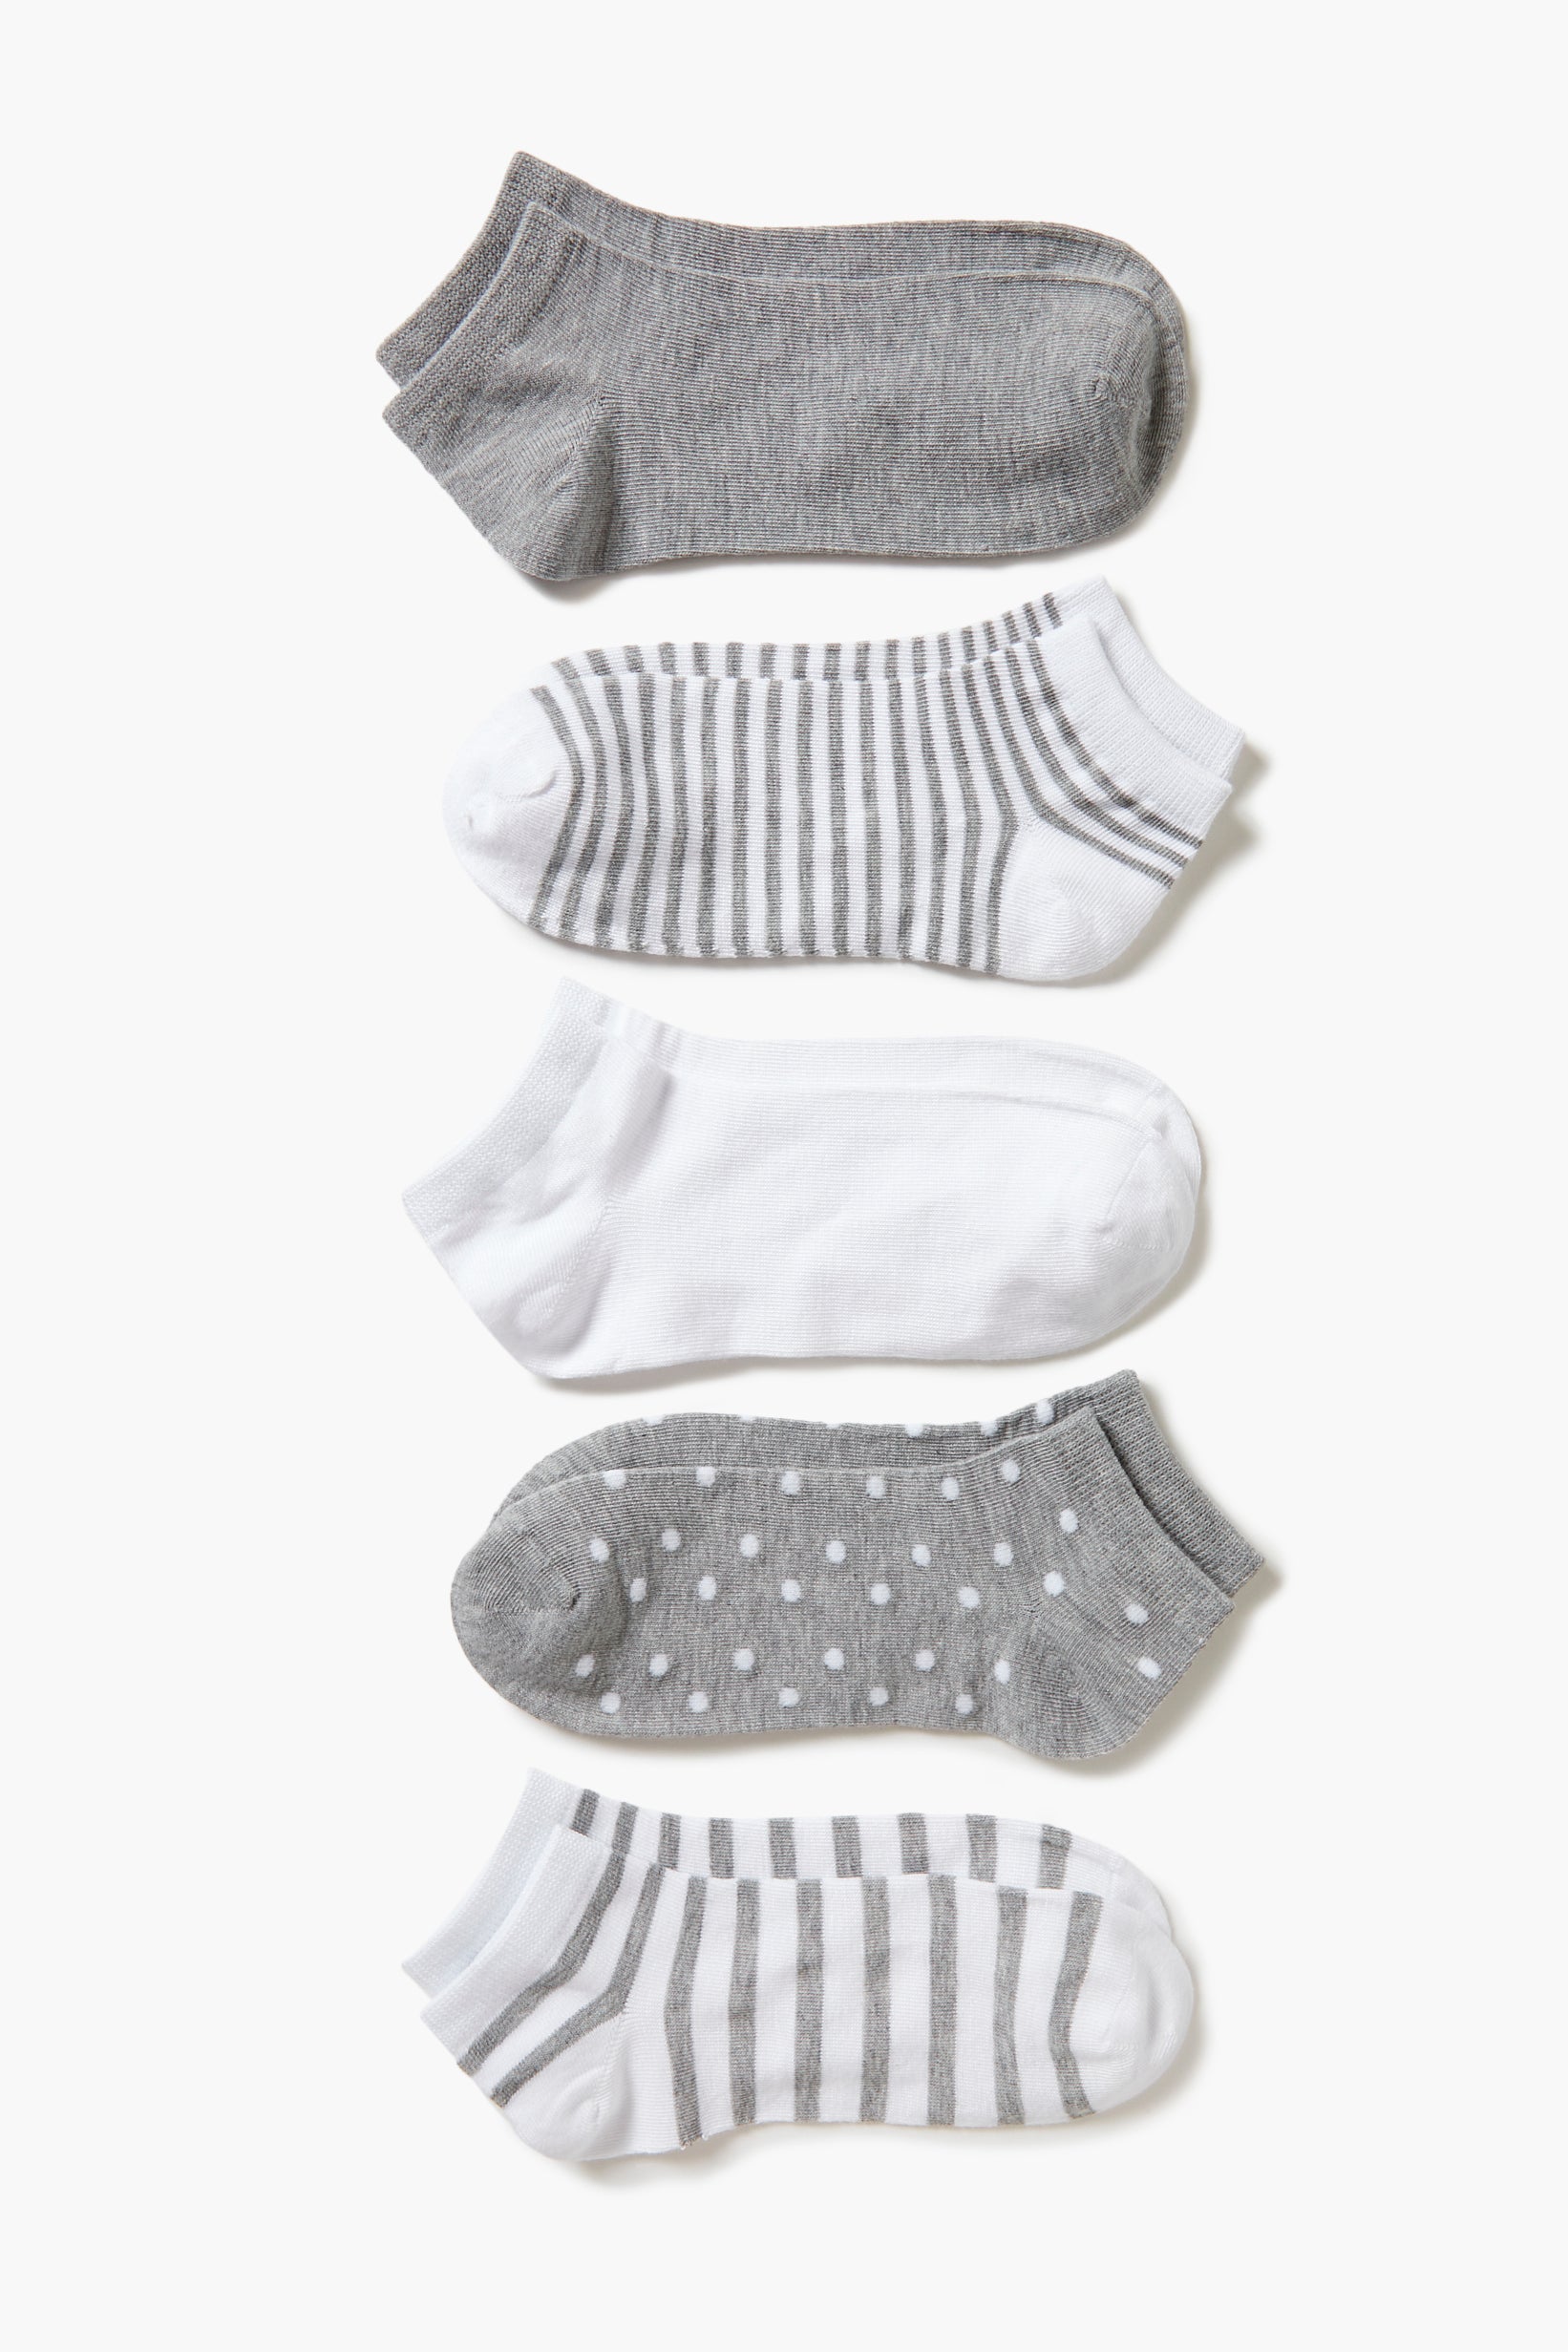 Heather Grey/White Assorted Print Ankle Socks Set - 5 pack 1